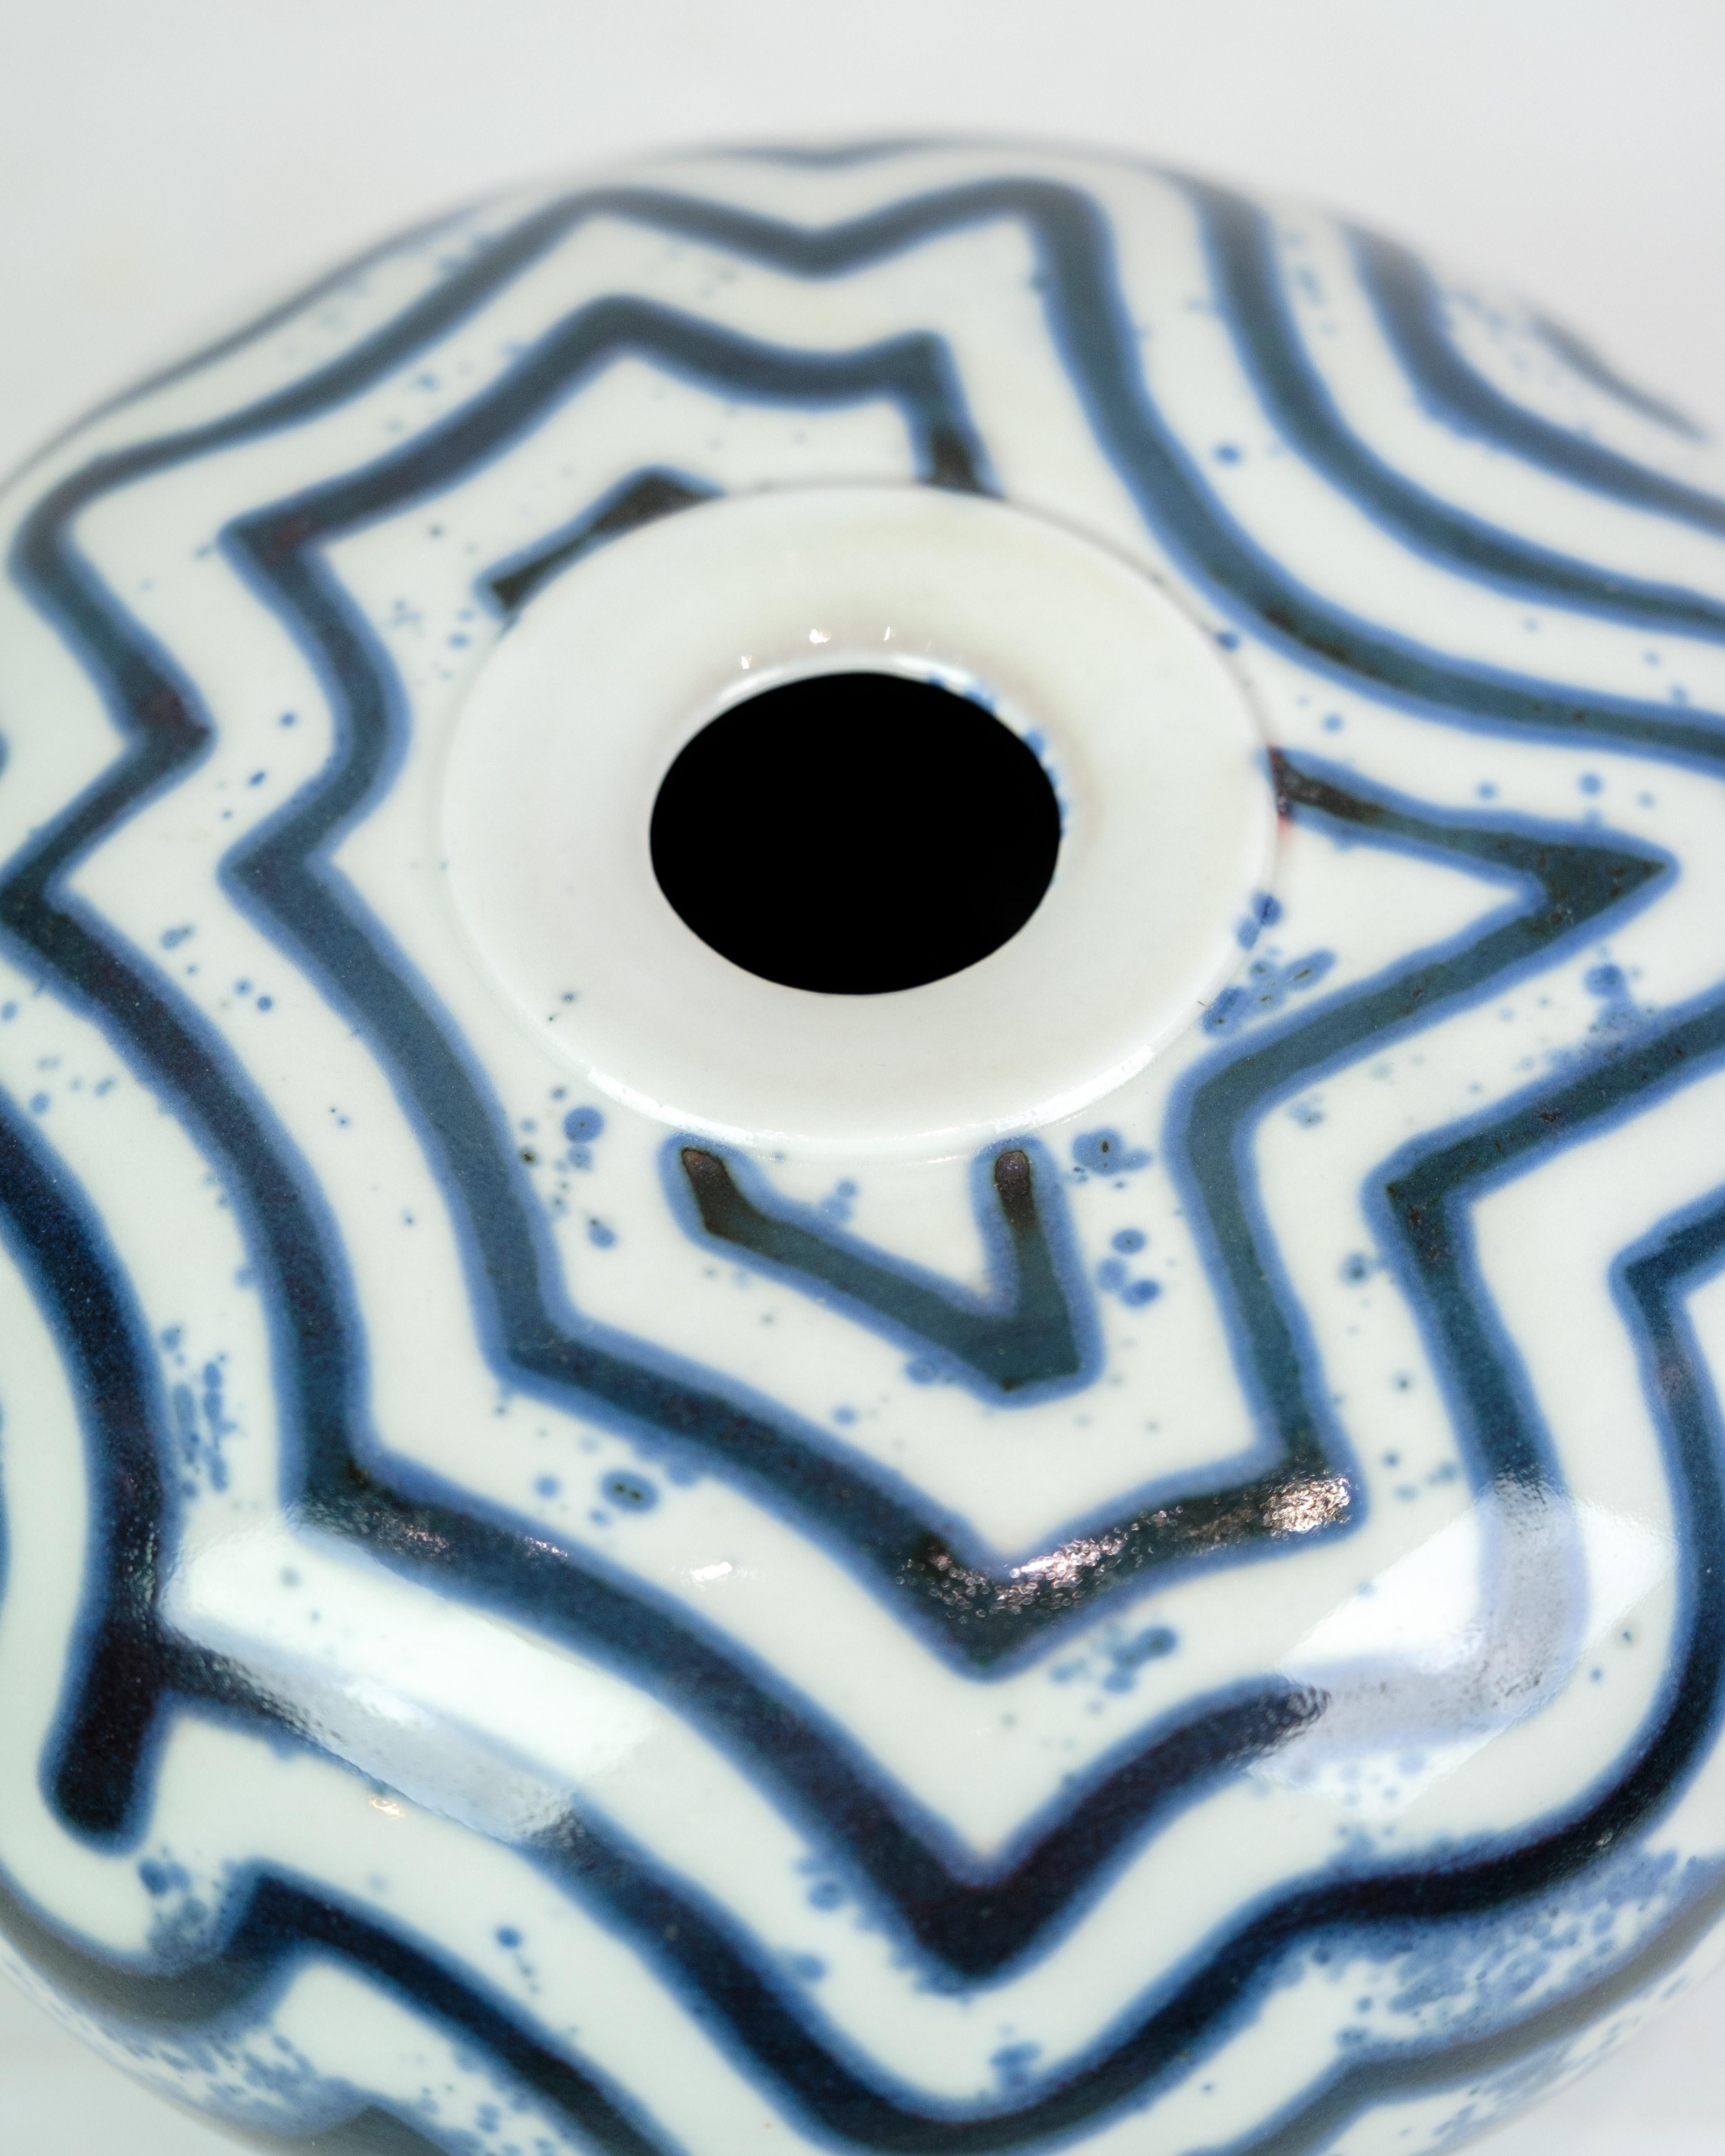 Mid-Century Modern Ceramic Vase In Blue and White Designed By Per Weiss From 1990s For Sale